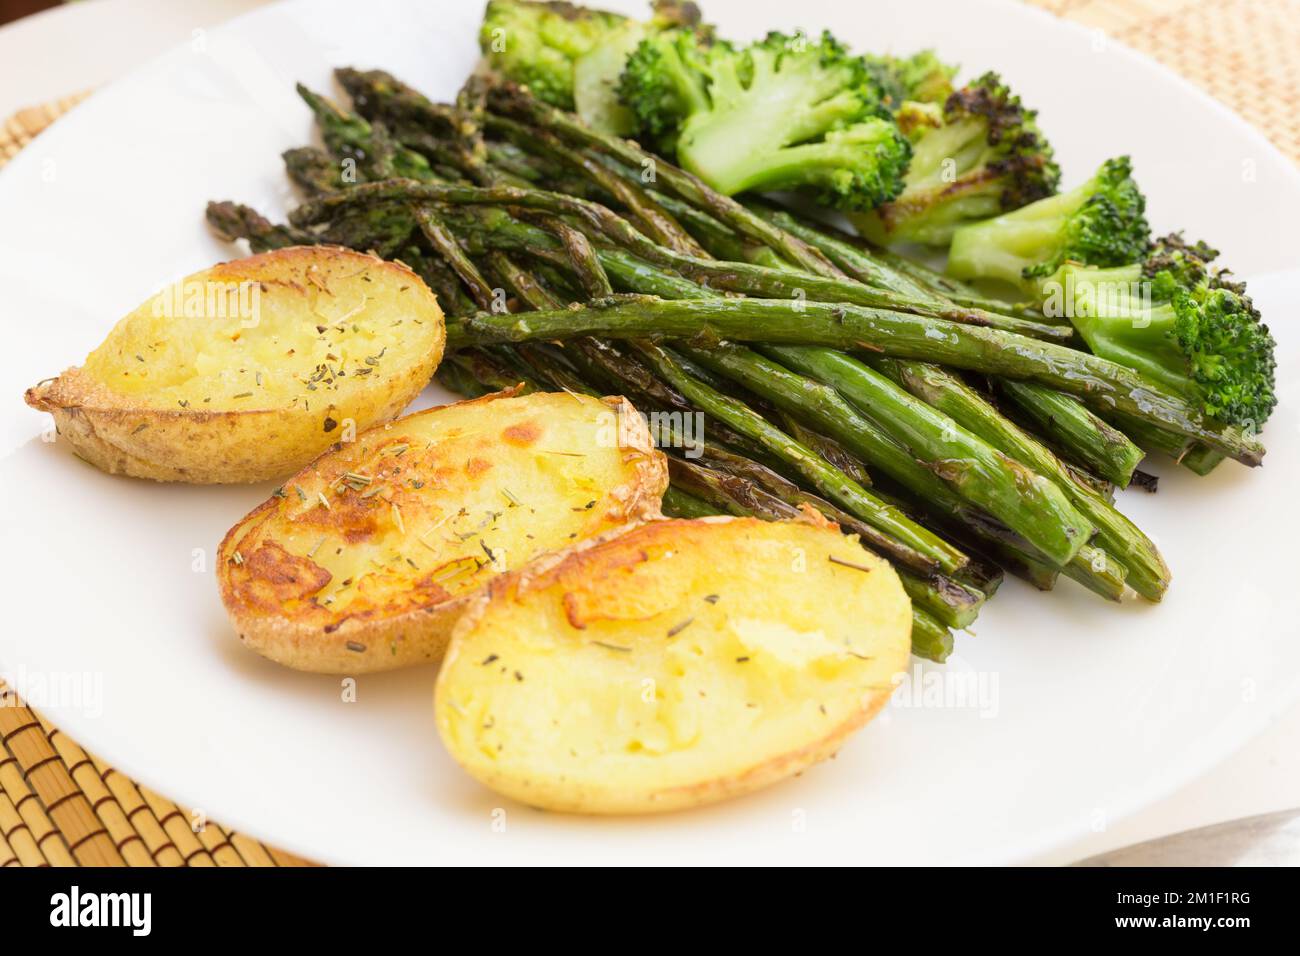 lean dish of cooked fried inflorescences of broccoli, asparagus growth and baked potatoes and Provencal herbs Stock Photo